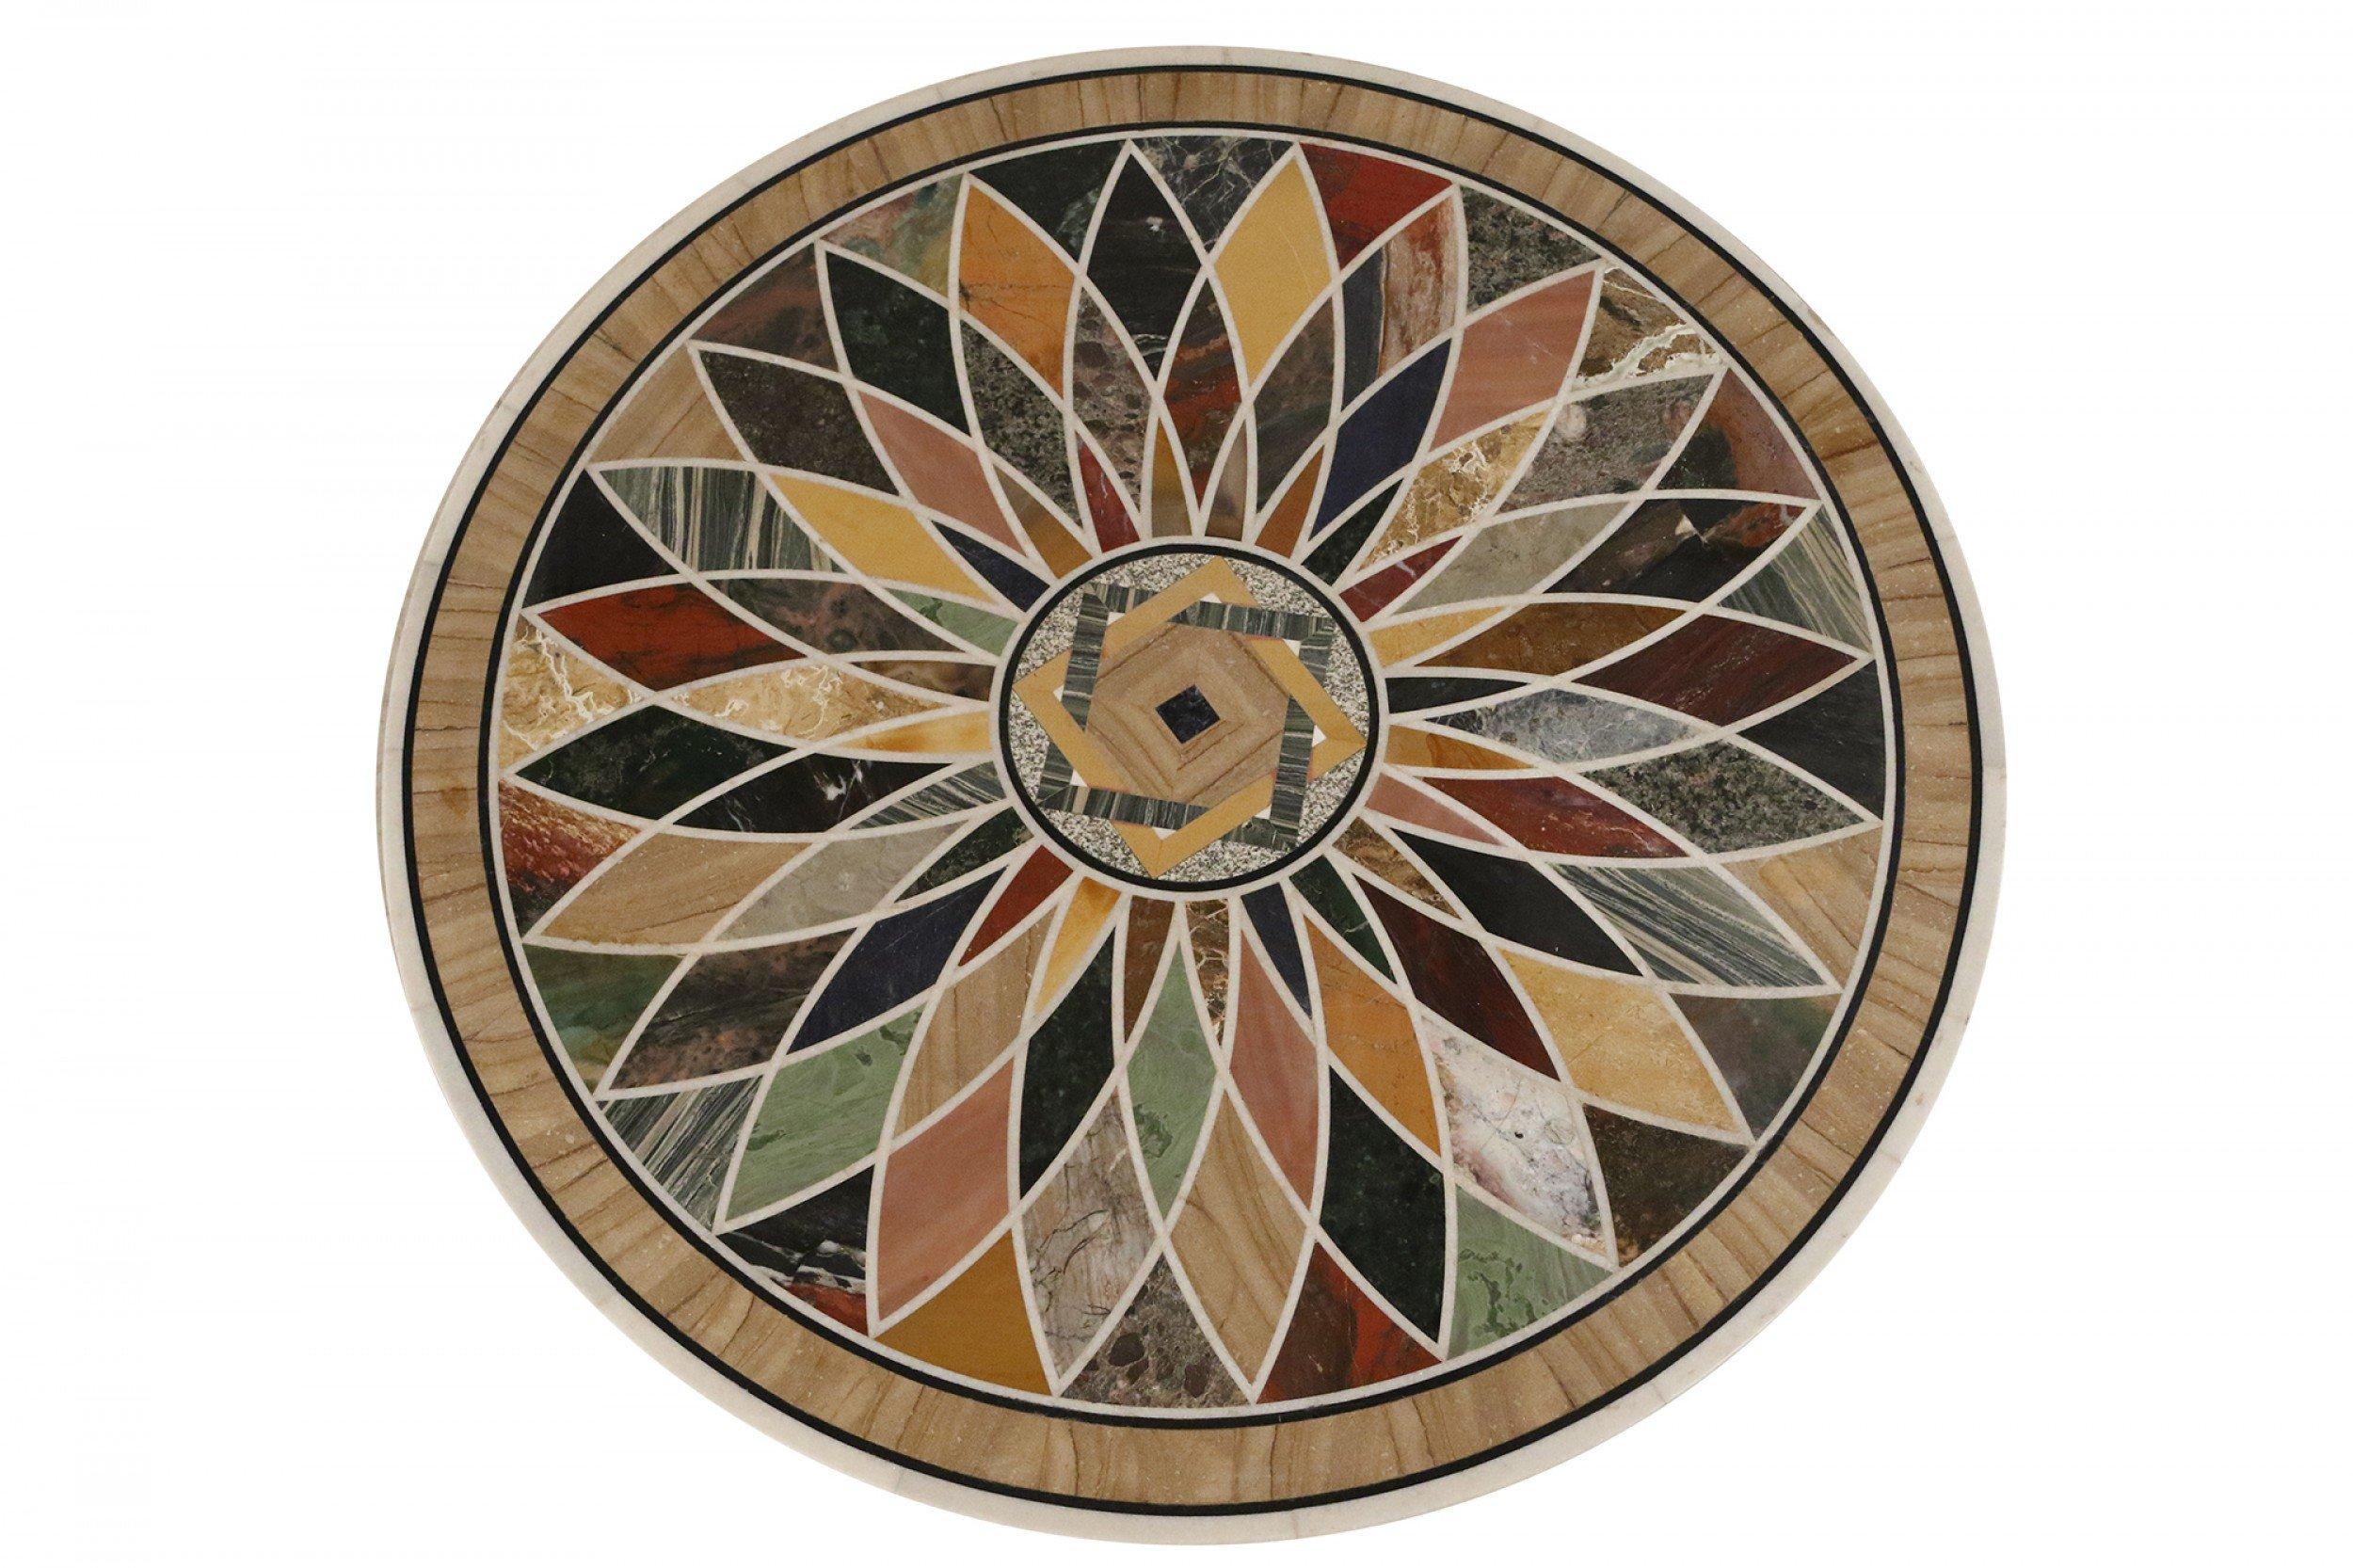 Italian neo-classic marble coffee table with circular inlaid multi-colored marble top resting on an antique acanthus leaf design marble capital as a pedestal base.
     